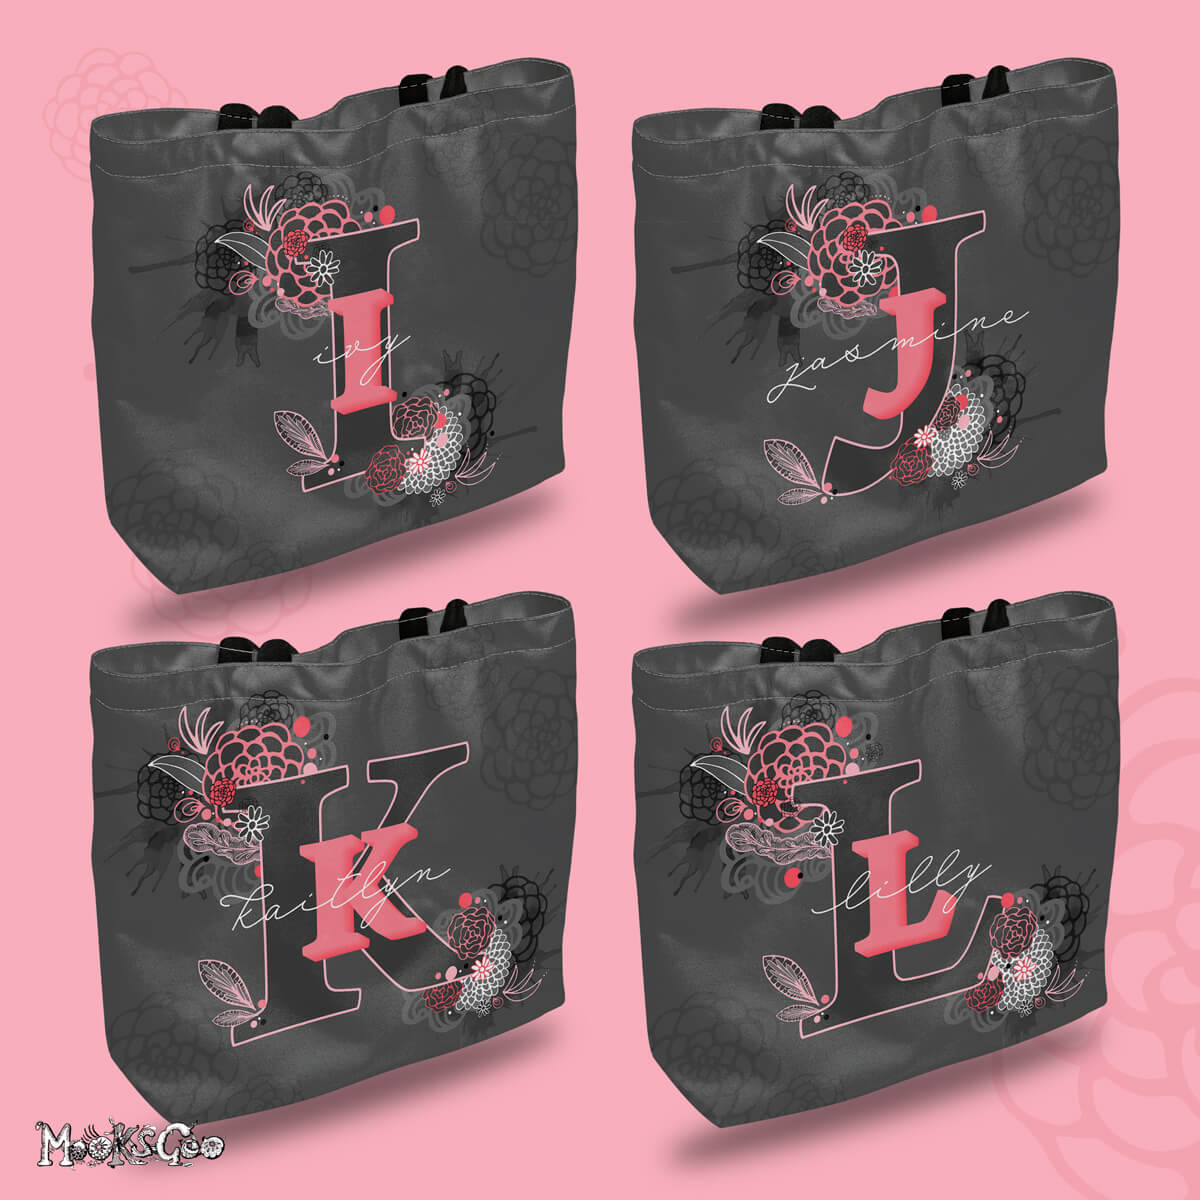 Personalised tote bags with letters I for Ivy, J for Jasmine, K for Kaitlyn, and L for Lilly, designed by MooksGoo